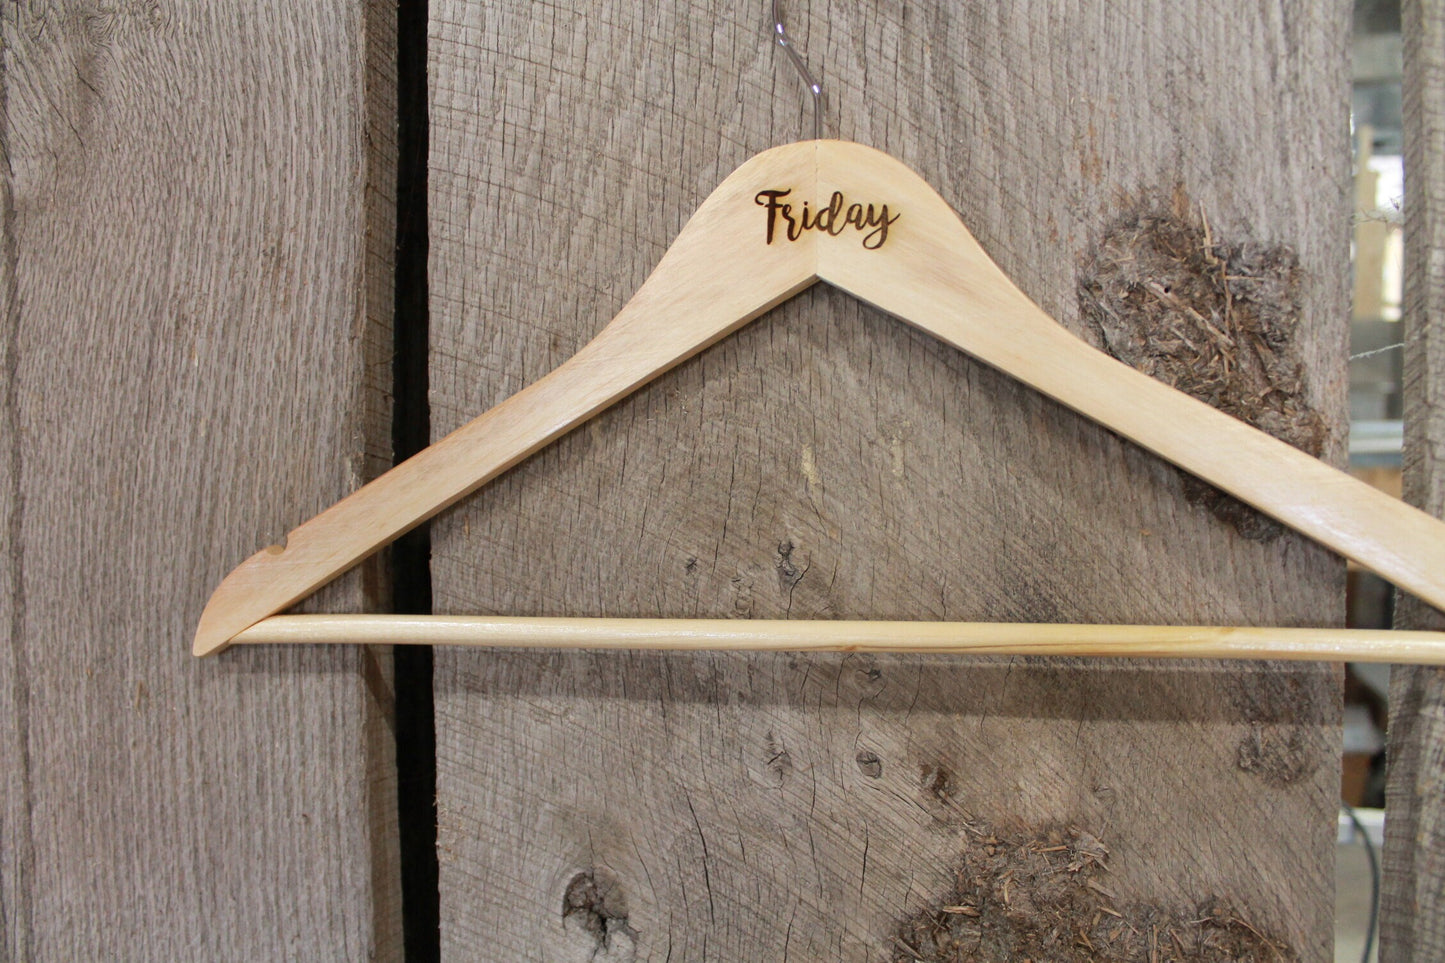 Days of the Week Set of 7 Engraved Wooden Clothes Hangers Sturdy Monday through Sunday Wood Custom